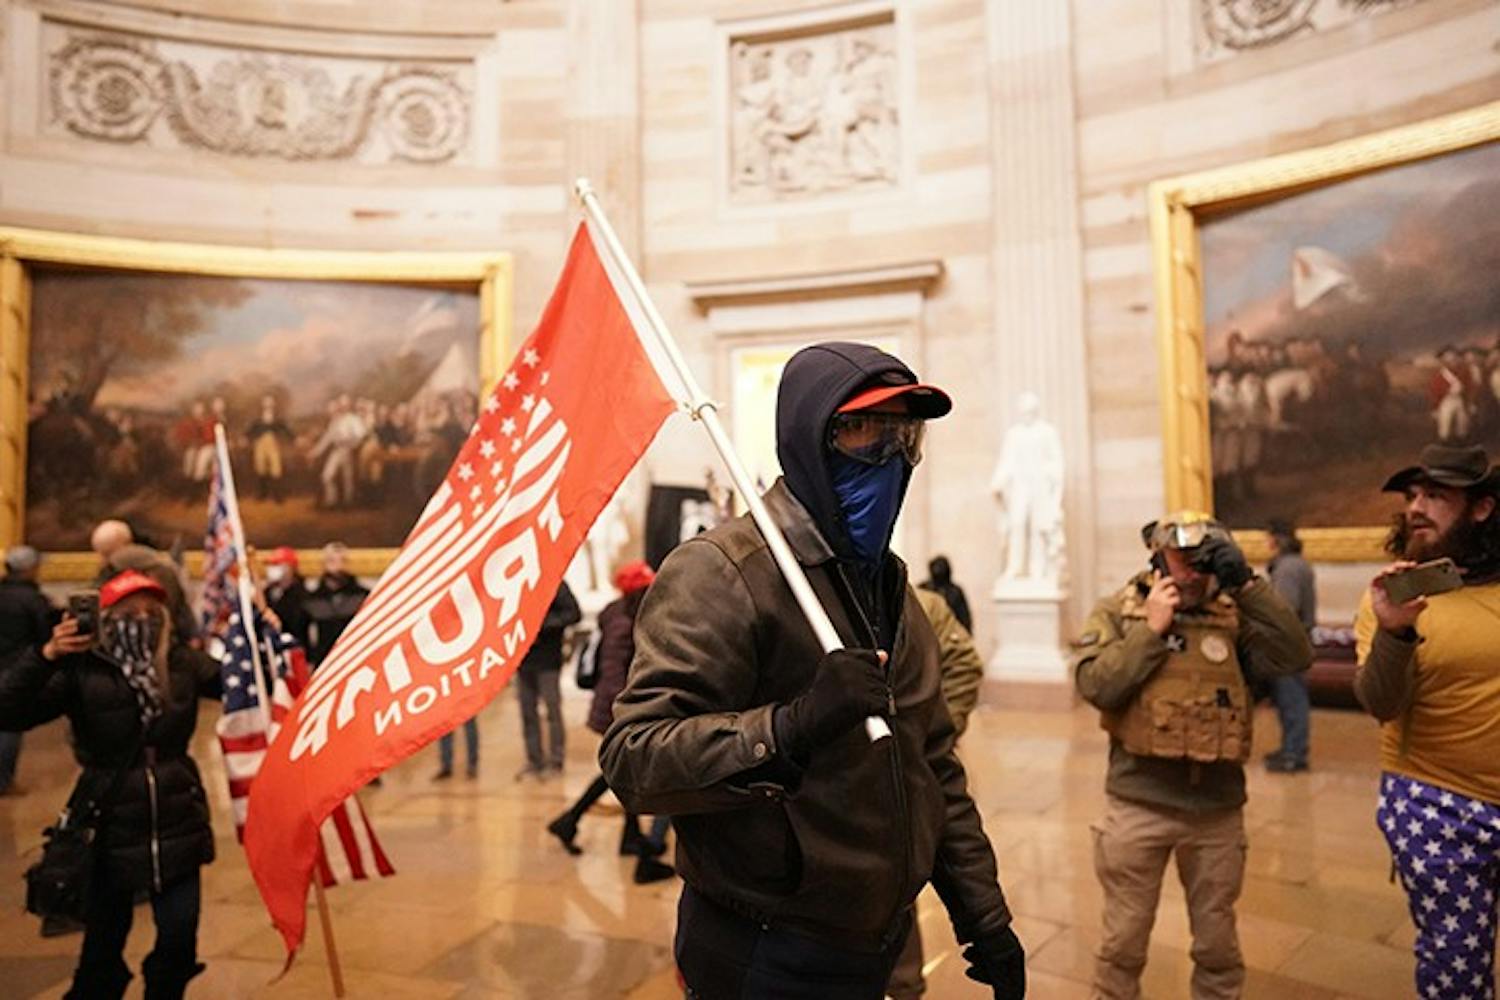 Protesters storm the Capitol and halt a joint session of the 117th Congress on Wednesday, Jan. 6, 2021, in Washington, D.C. (Kent Nishimura/Los Angeles Times/TNS)